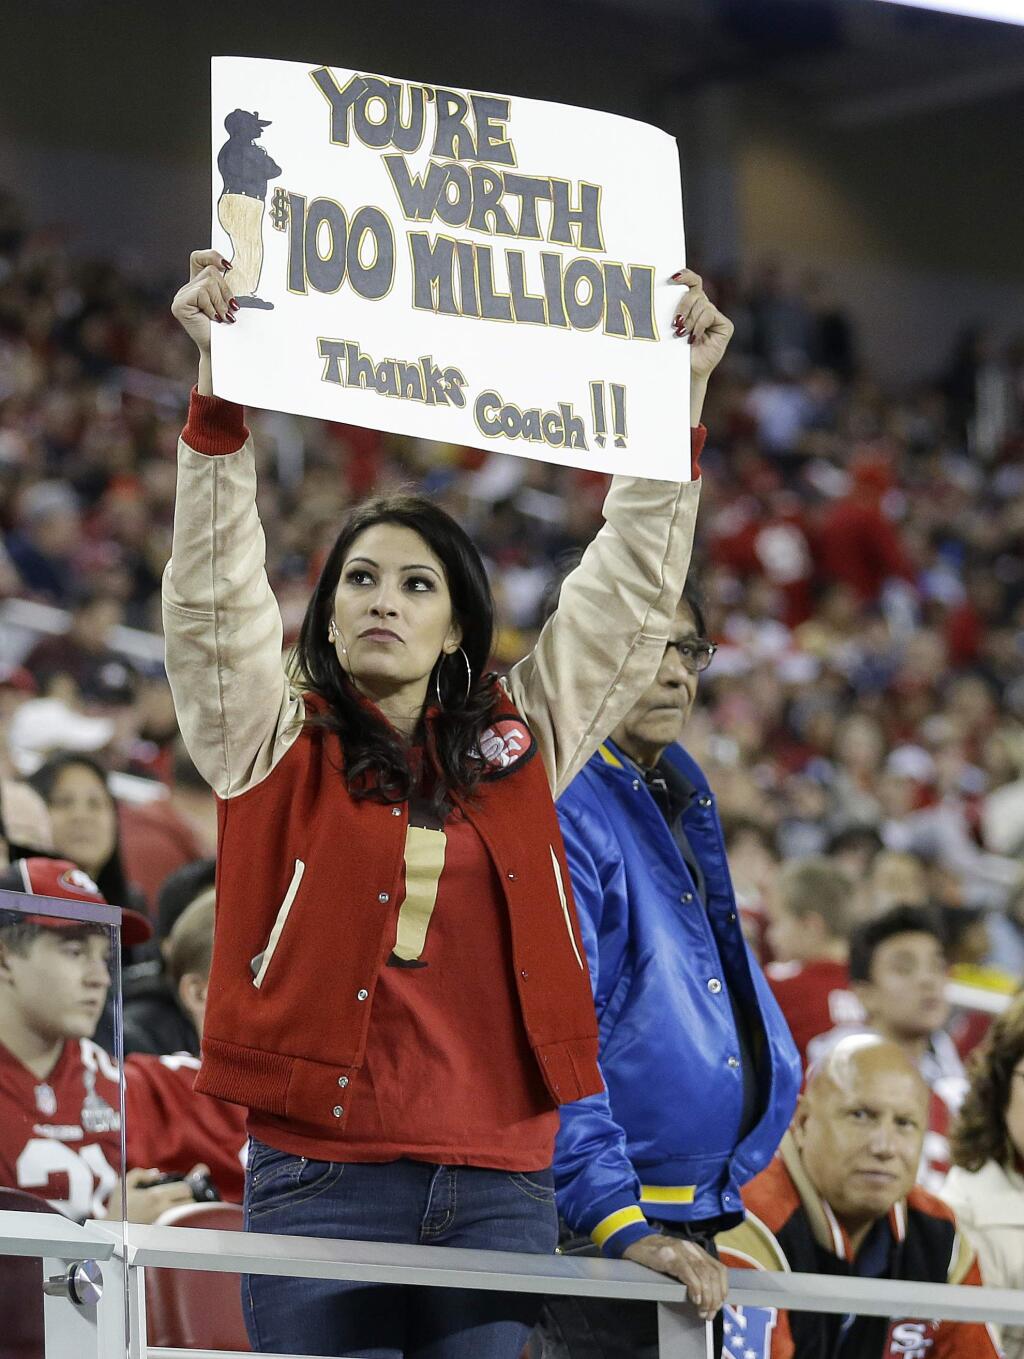 A fan holds up a sign for San Francisco 49ers head coach Jim Harbaugh during the second half of a game between the San Francisco 49ers and the San Diego Chargers in Santa Clara, Saturday, Dec. 20, 2014. (AP Photo/Ben Margot)